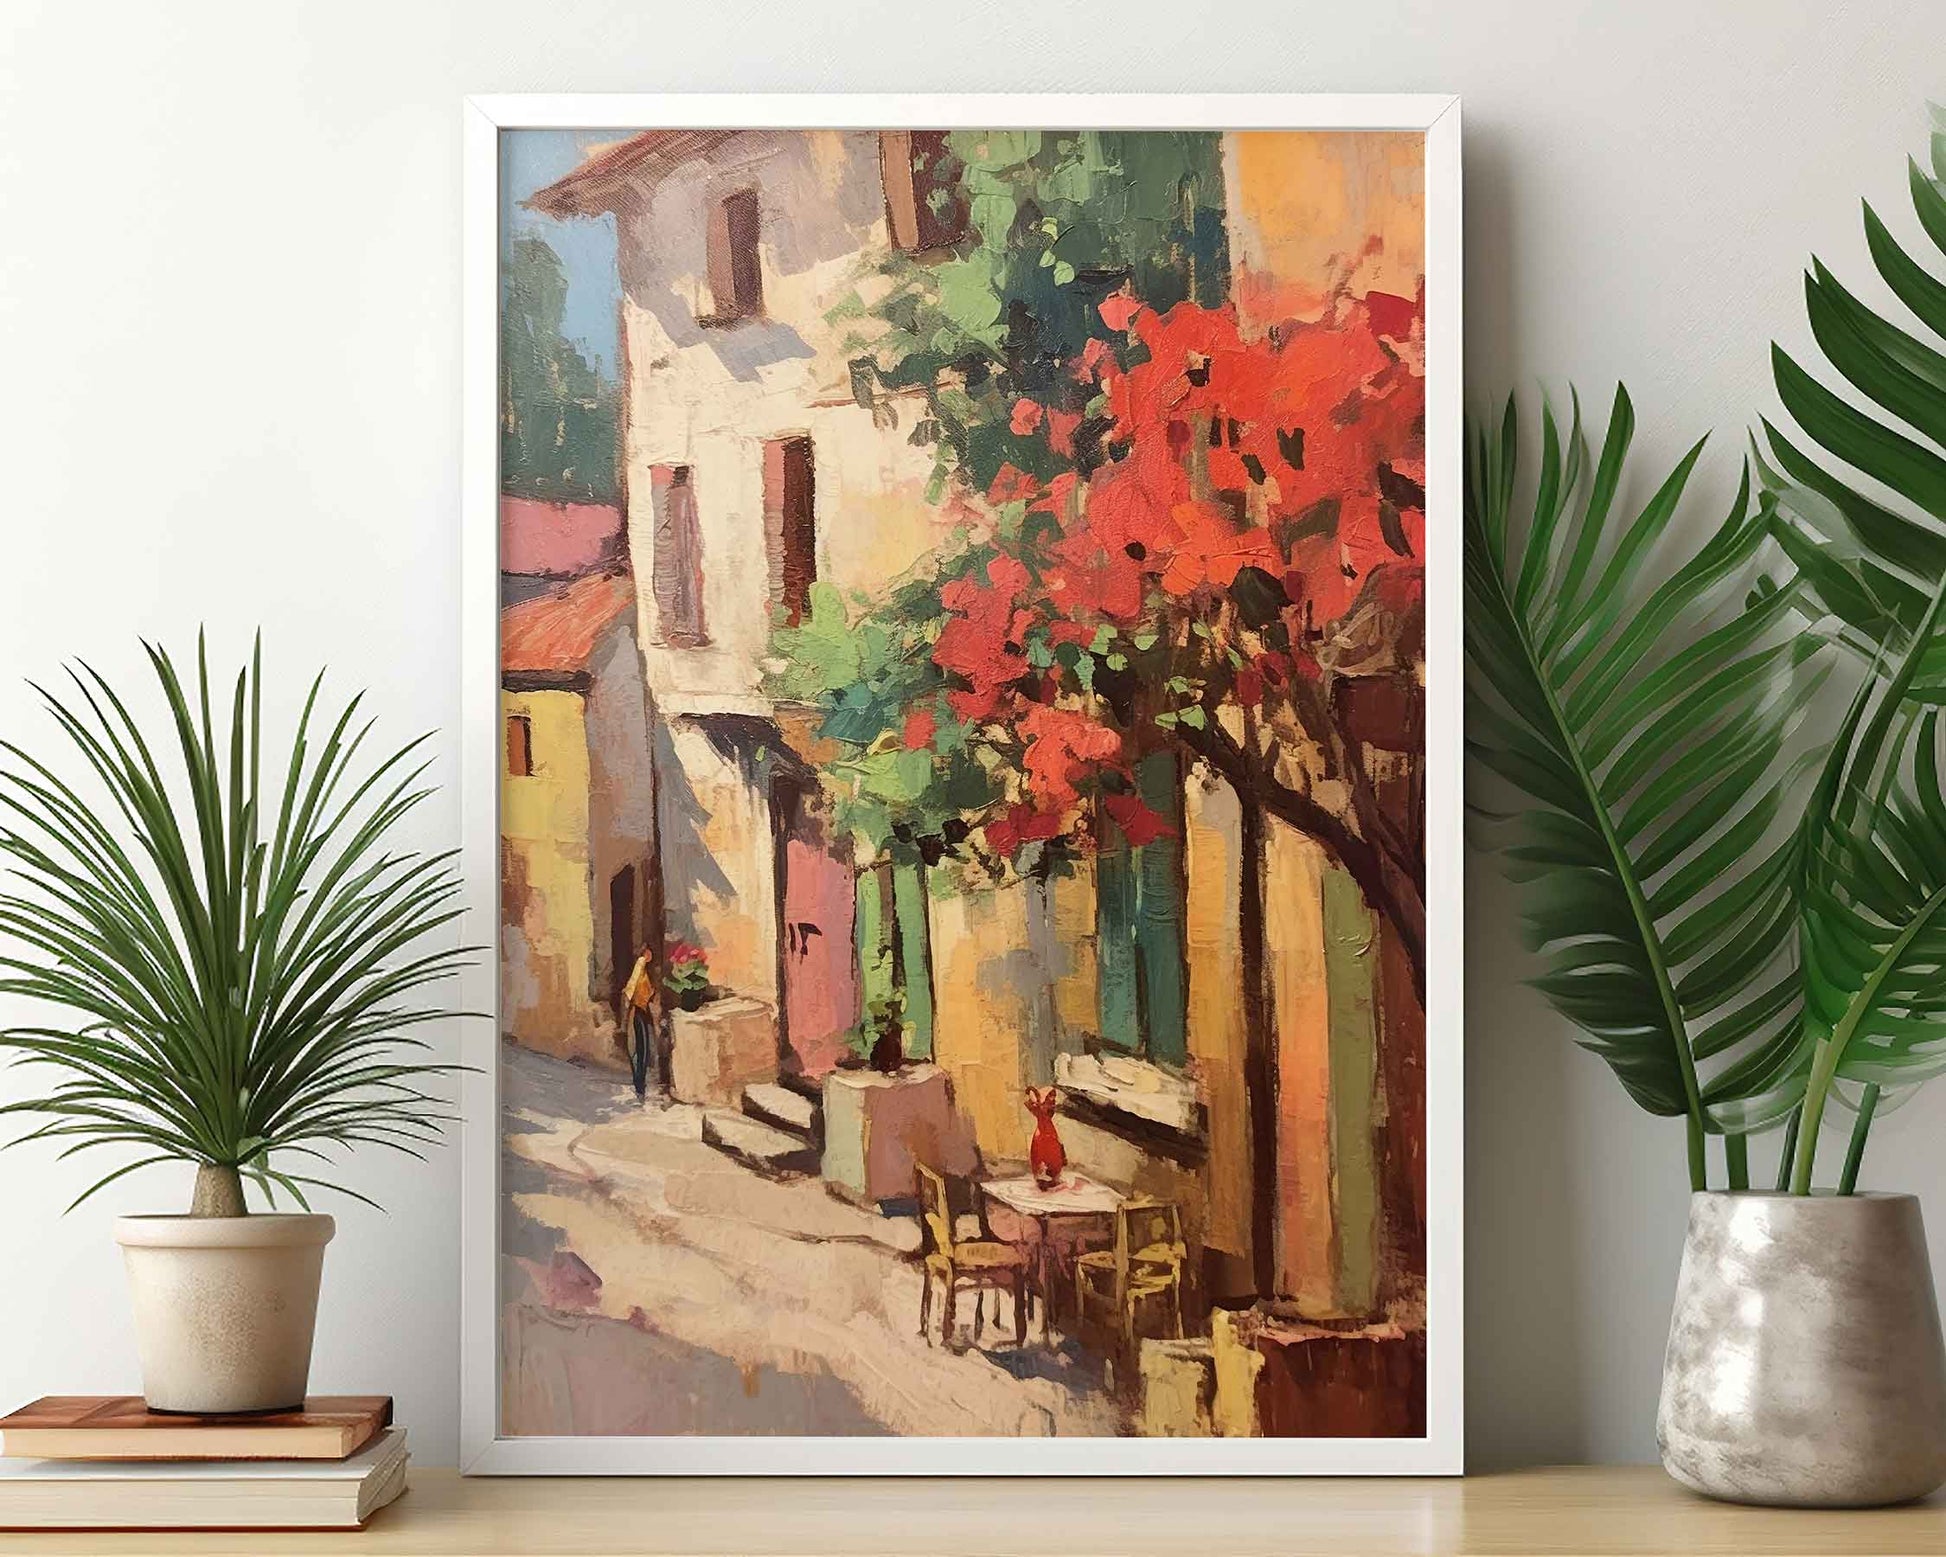 Framed Image of Italian Scenic Travel Lifestyle & Landscapes of Italy Wall Art Prints